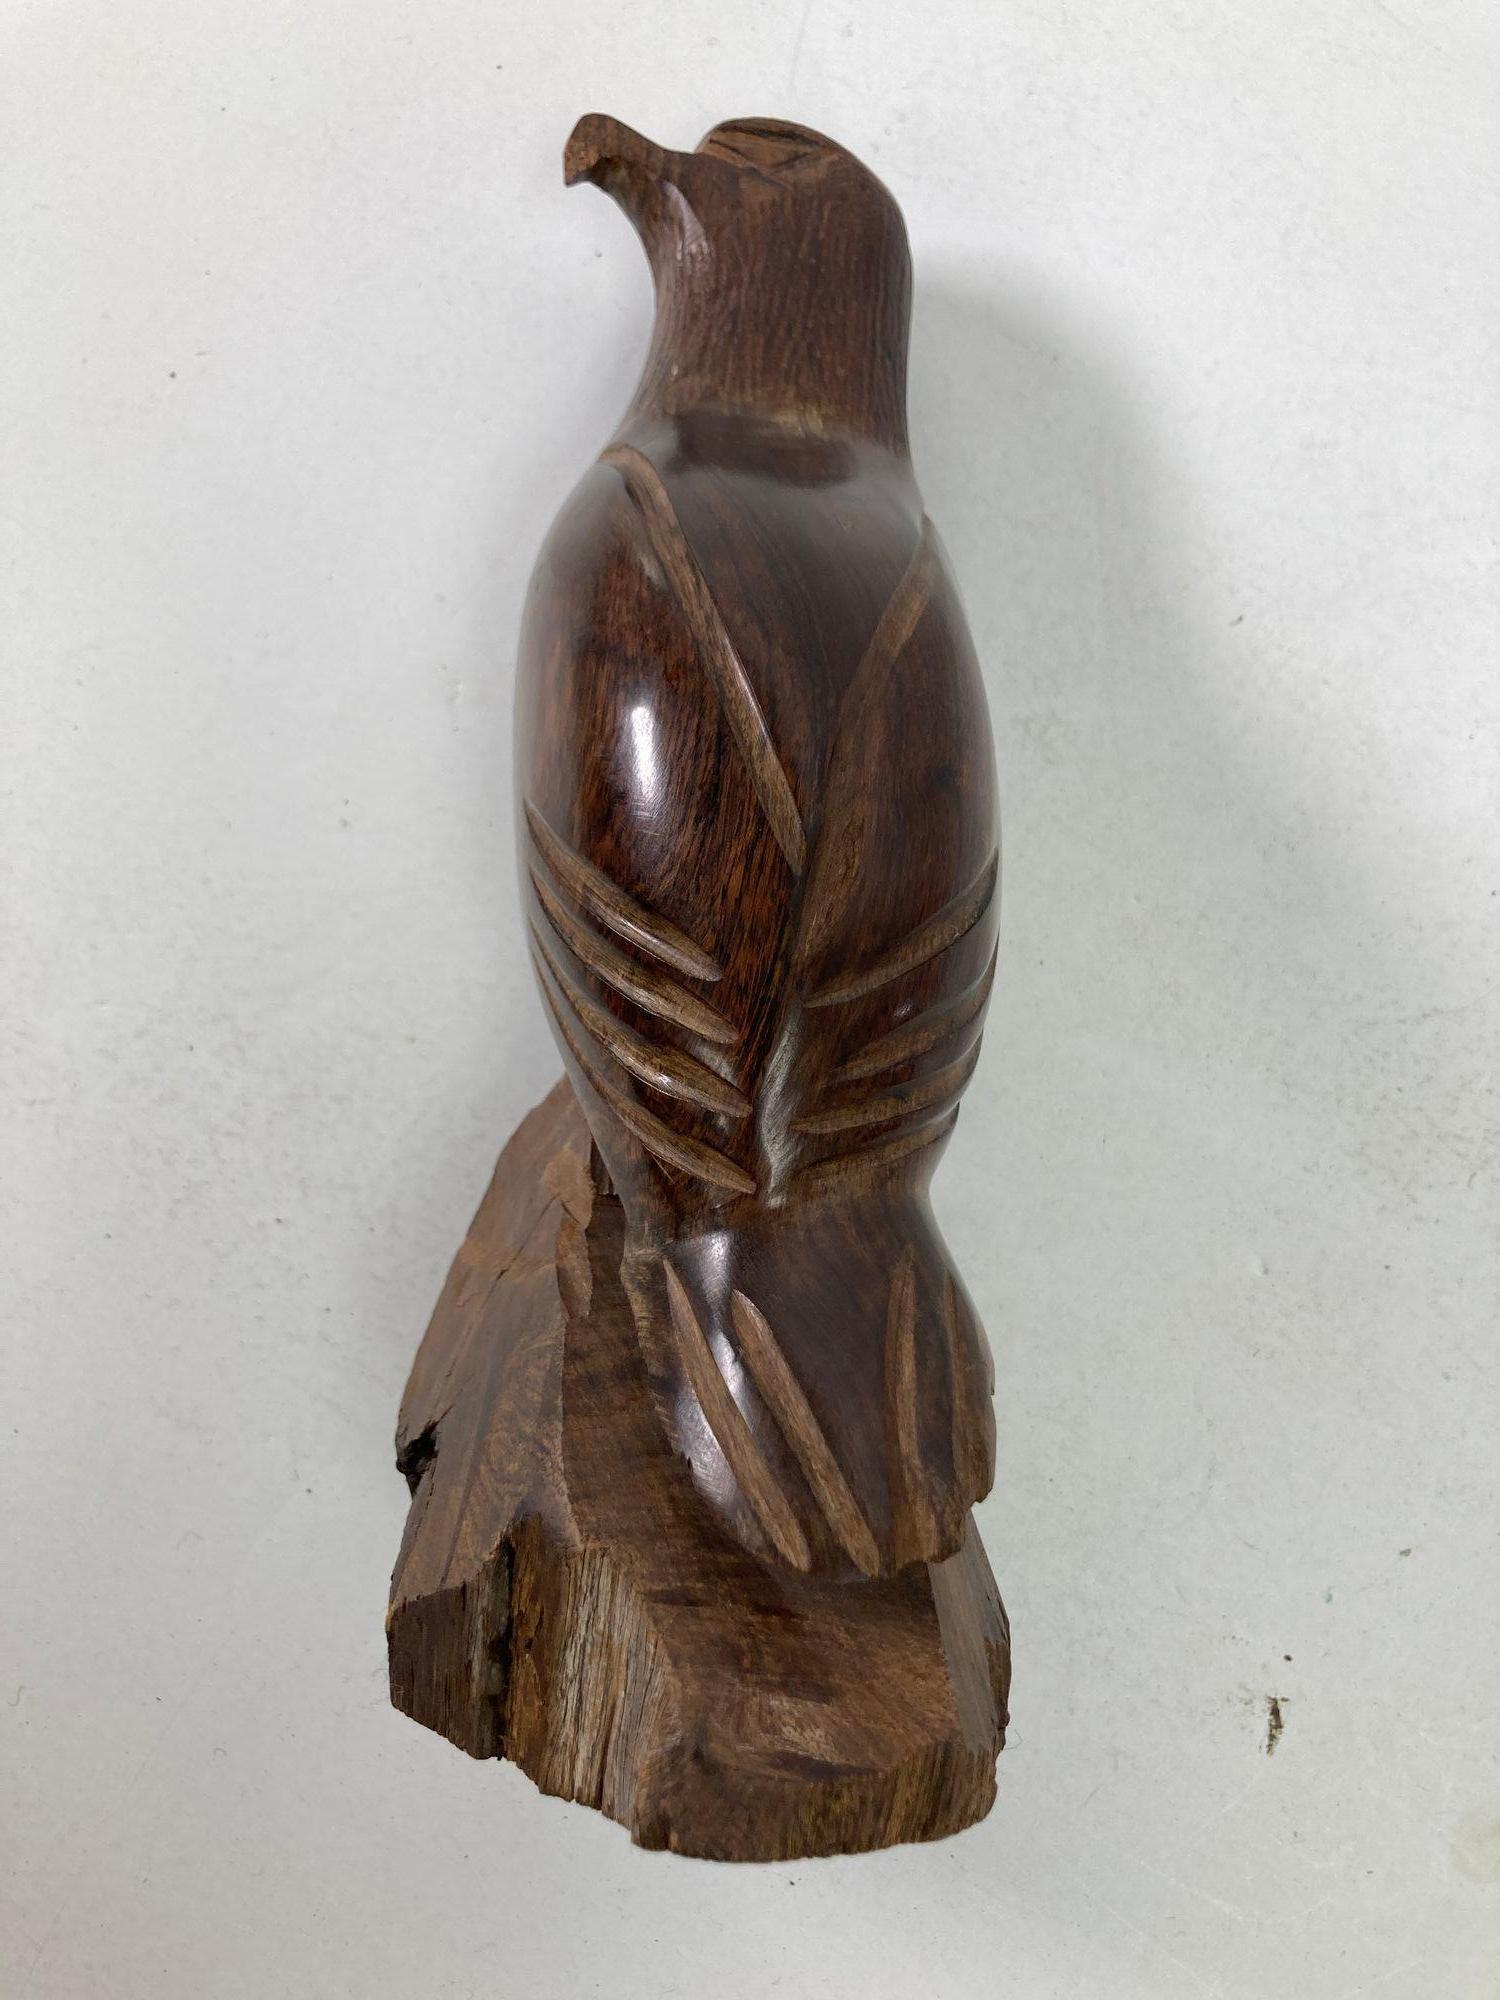 Handmade carved wood Falcon sculpture 1960s.
Vintage Seri Ironwood Animal Hand-Carved Sculpture of a American Eagle or Falcon.
Vintage Hand carved walnut wooden beautiful design decorative bird falcon sculpture.
Carved wood figure of an Eagle